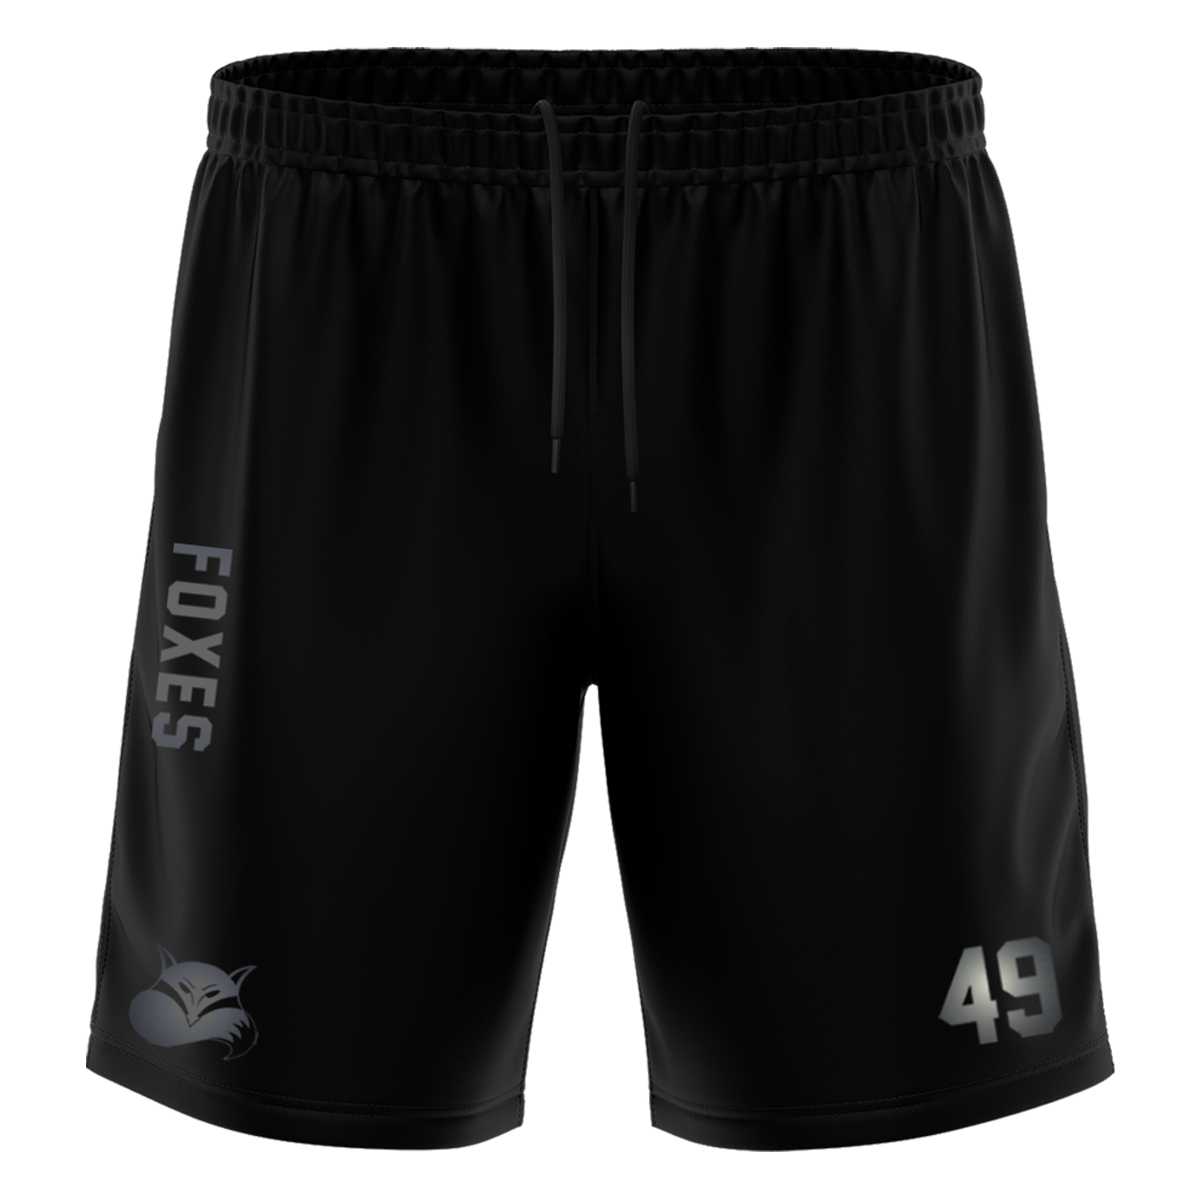 Foxes "Blackline" Training Short with Playernumber or Initials